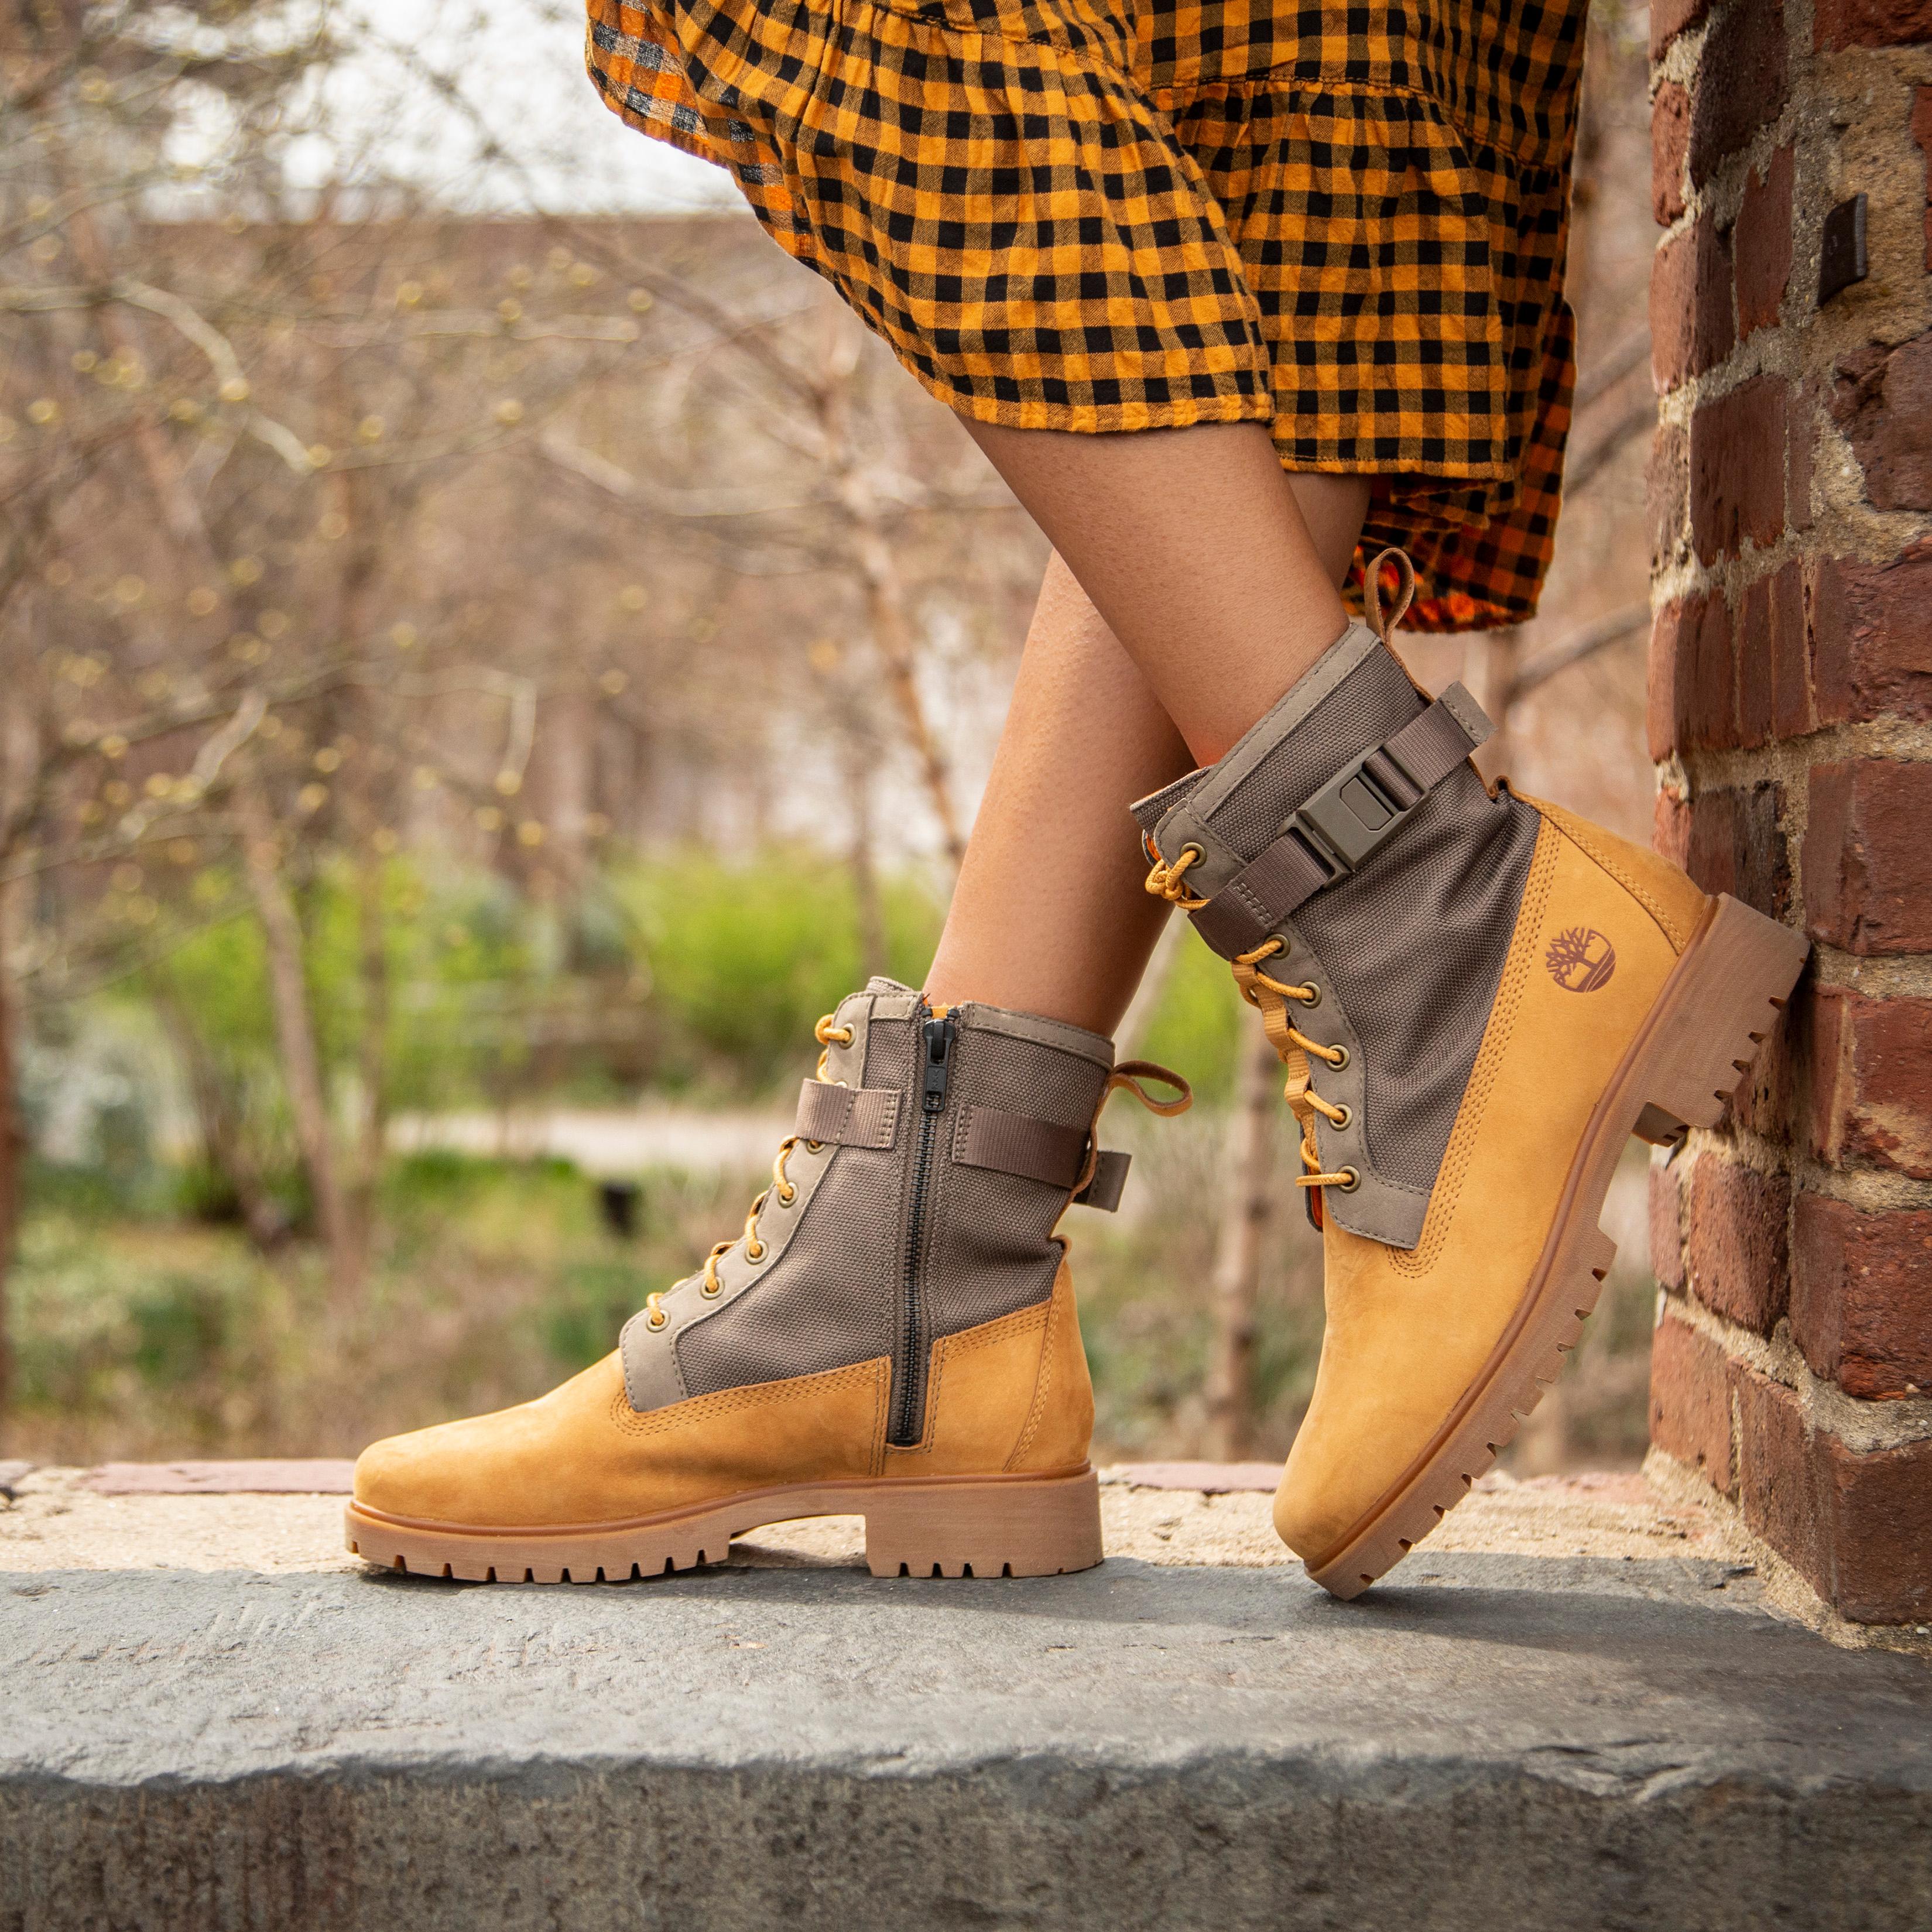 Timberland Twitter: "Step forward sustainably. The Jayne ReBOTL boot has linings made with at least 50% recycled plastic, while still being 100% waterproof. #Timberland https://t.co/G1NwsnSsmv" / Twitter